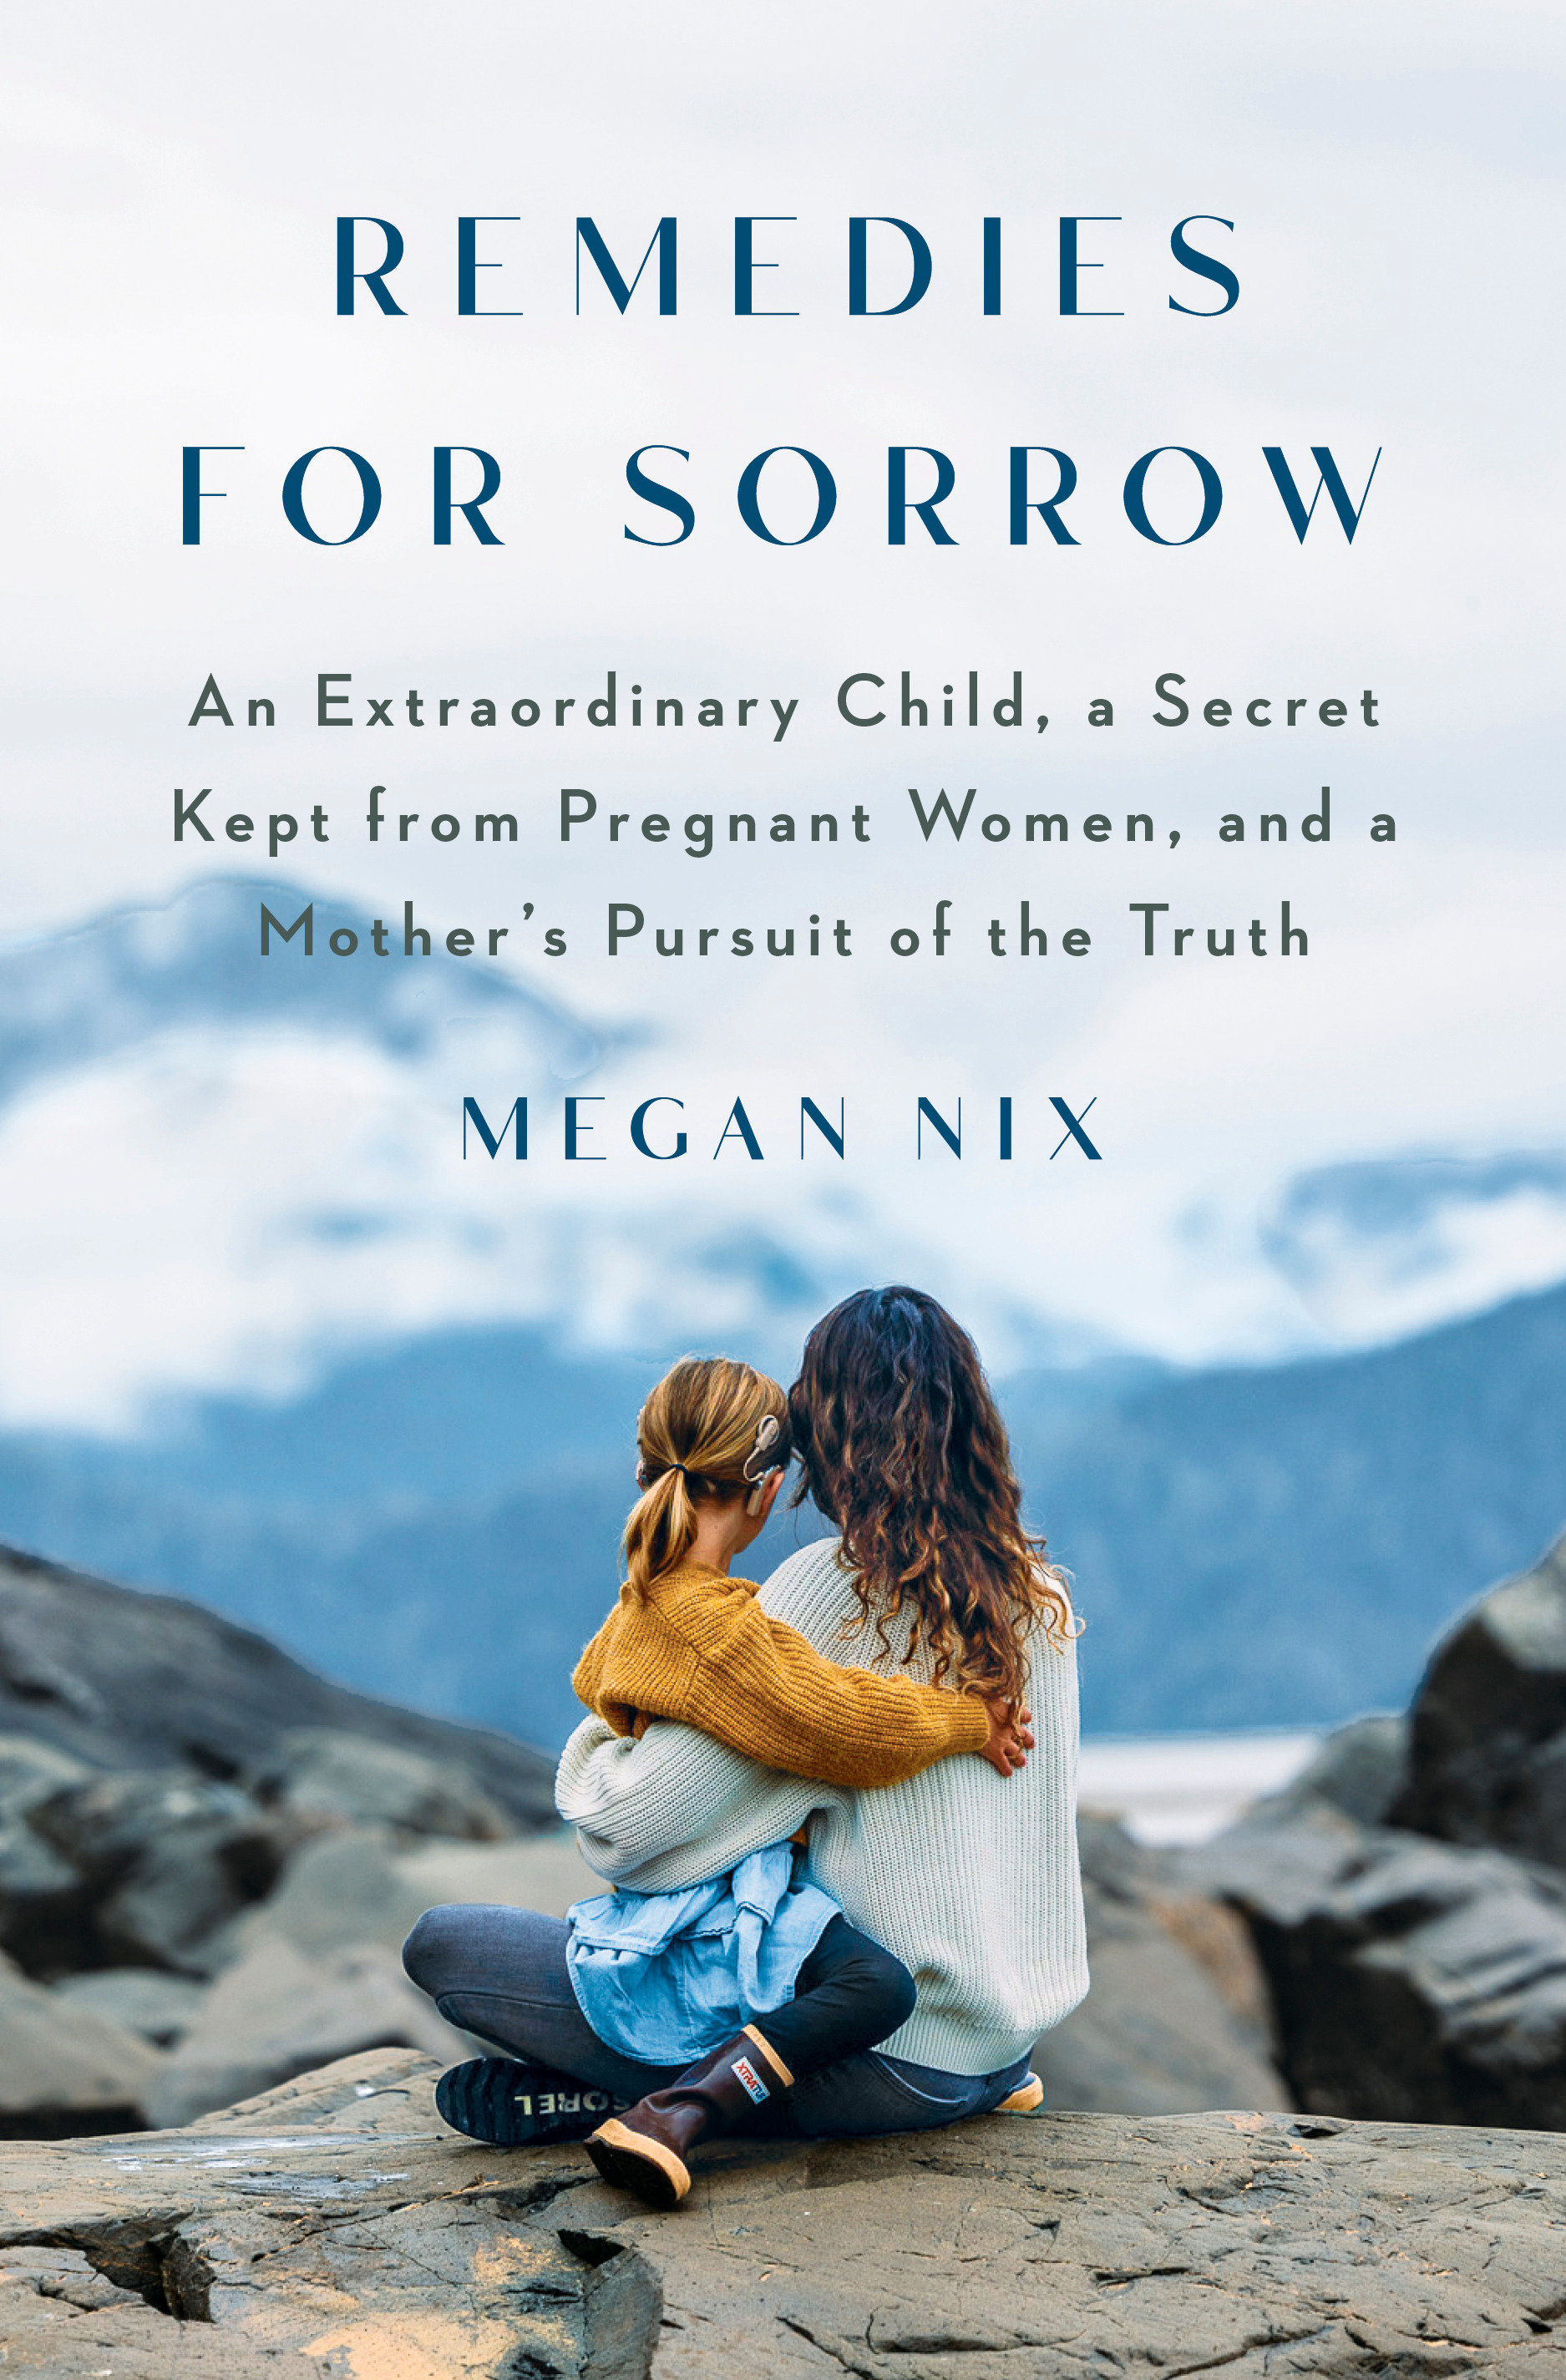 Remedies for Sorrow (Hardcover Book)